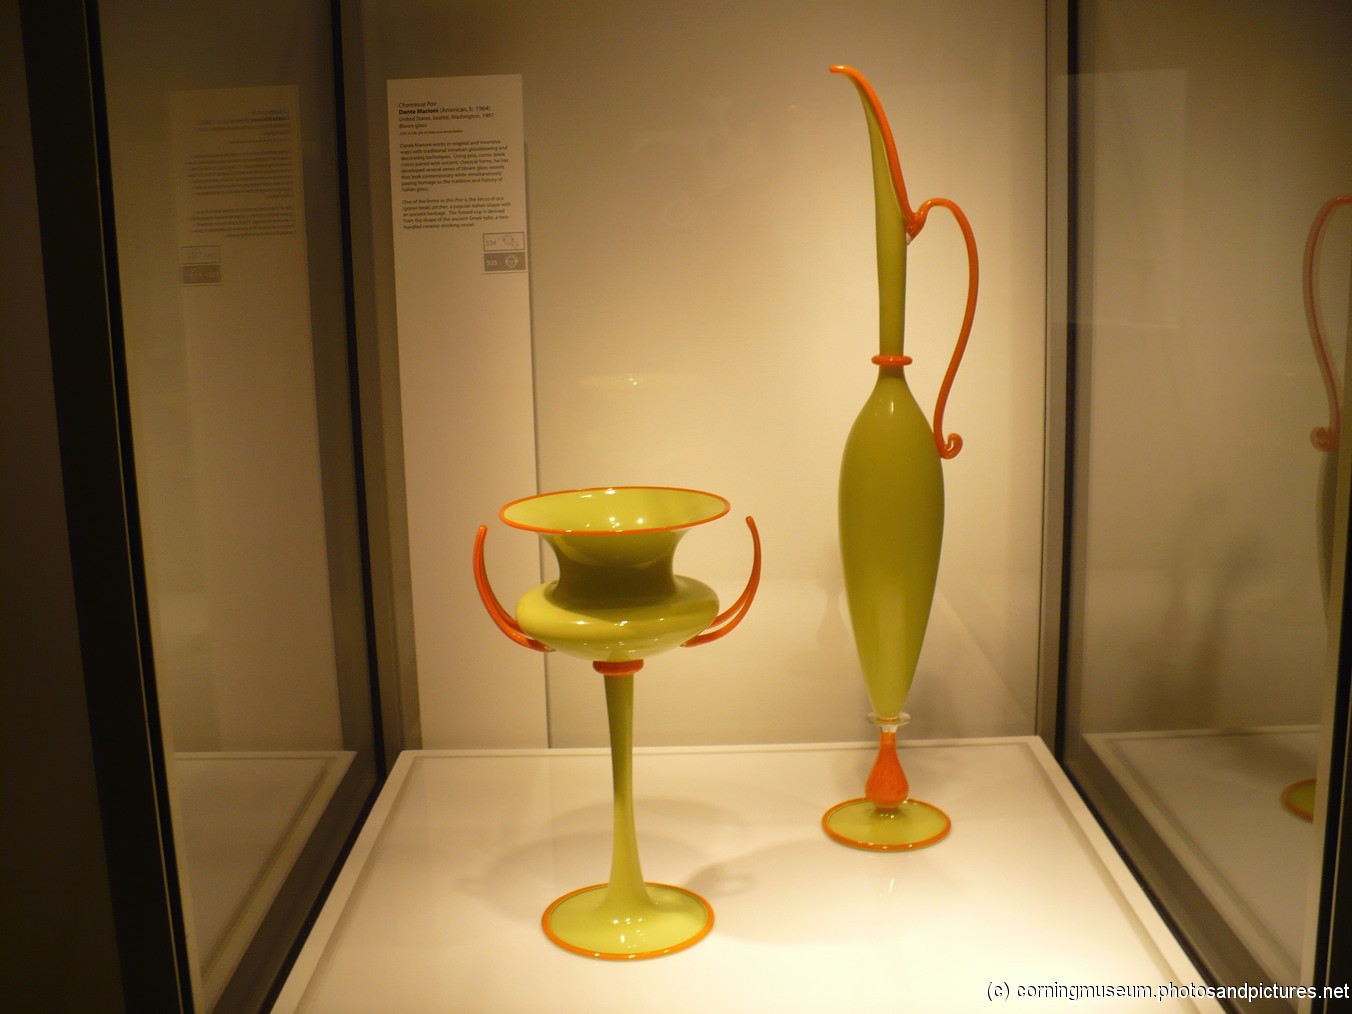 Dante Marioni's Cahrveuse Pair at Corning Museum of Glass.jpg
